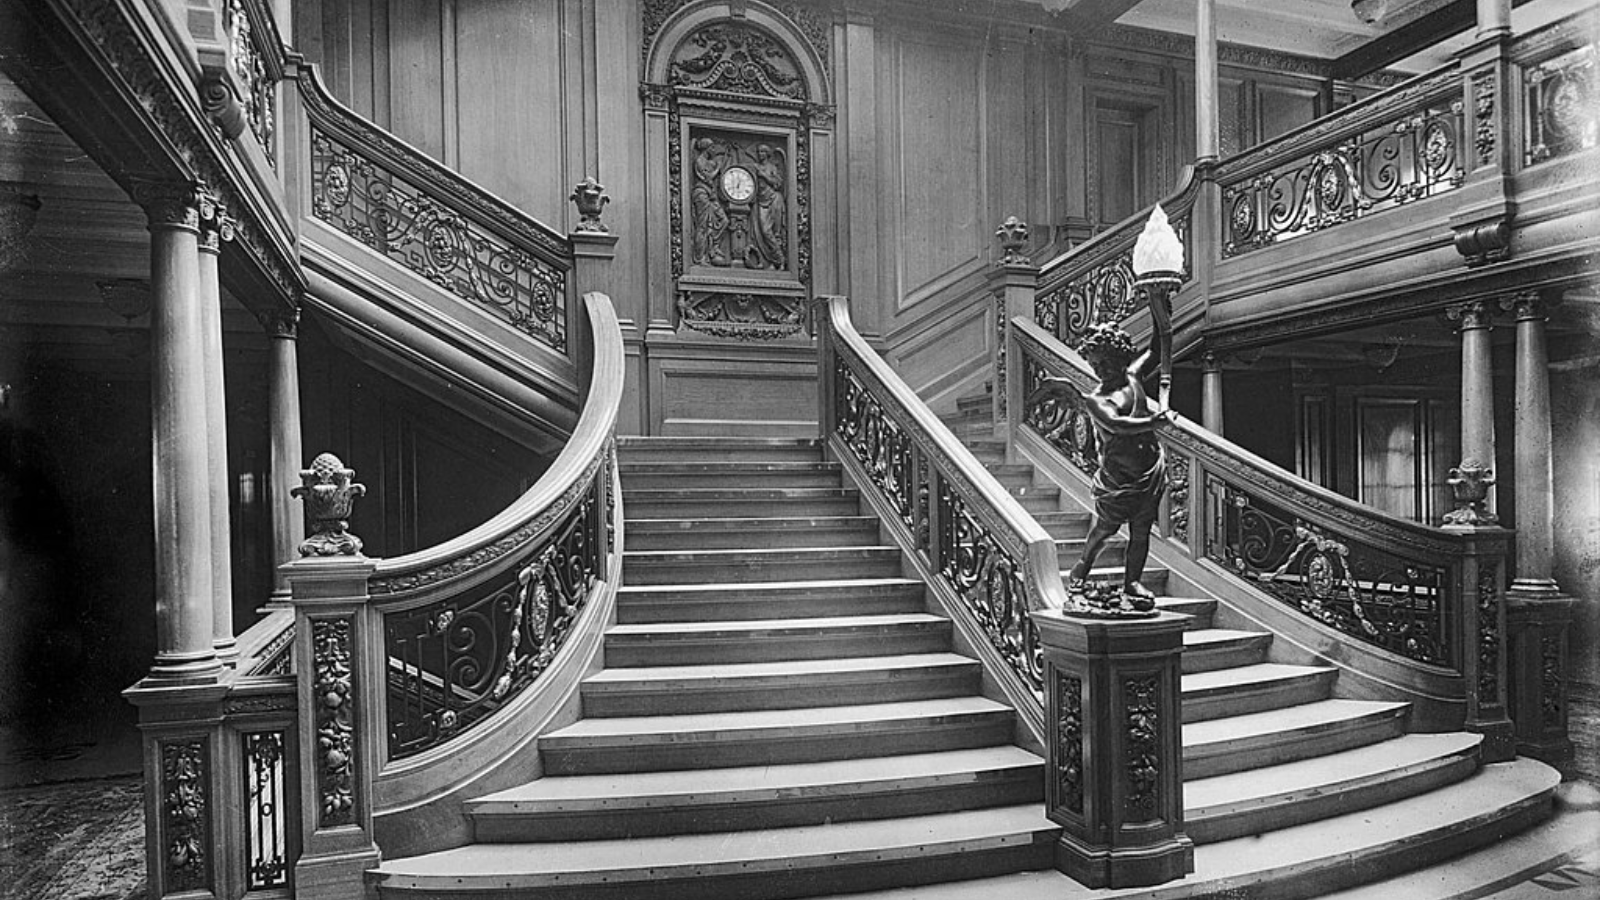 The Forward First Class Grand Staircase of Titanic's sister ship RMS Olympic. Titanic's staircase will have looked nearly identical.